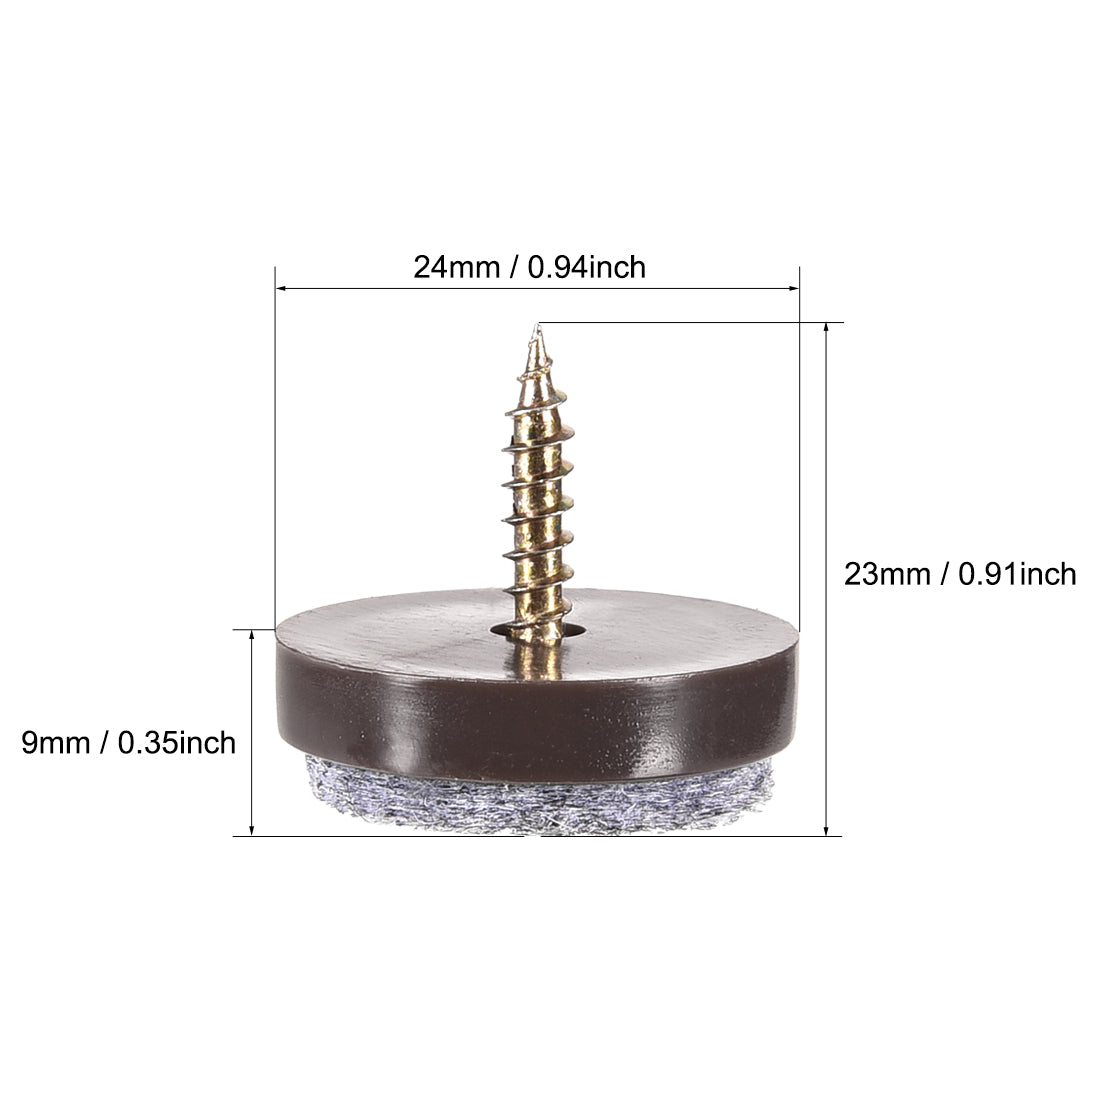 uxcell Uxcell Furniture Feet Nail Protector Screw-in 24mm Dia for Wooden Table Chair Leg 40pcs